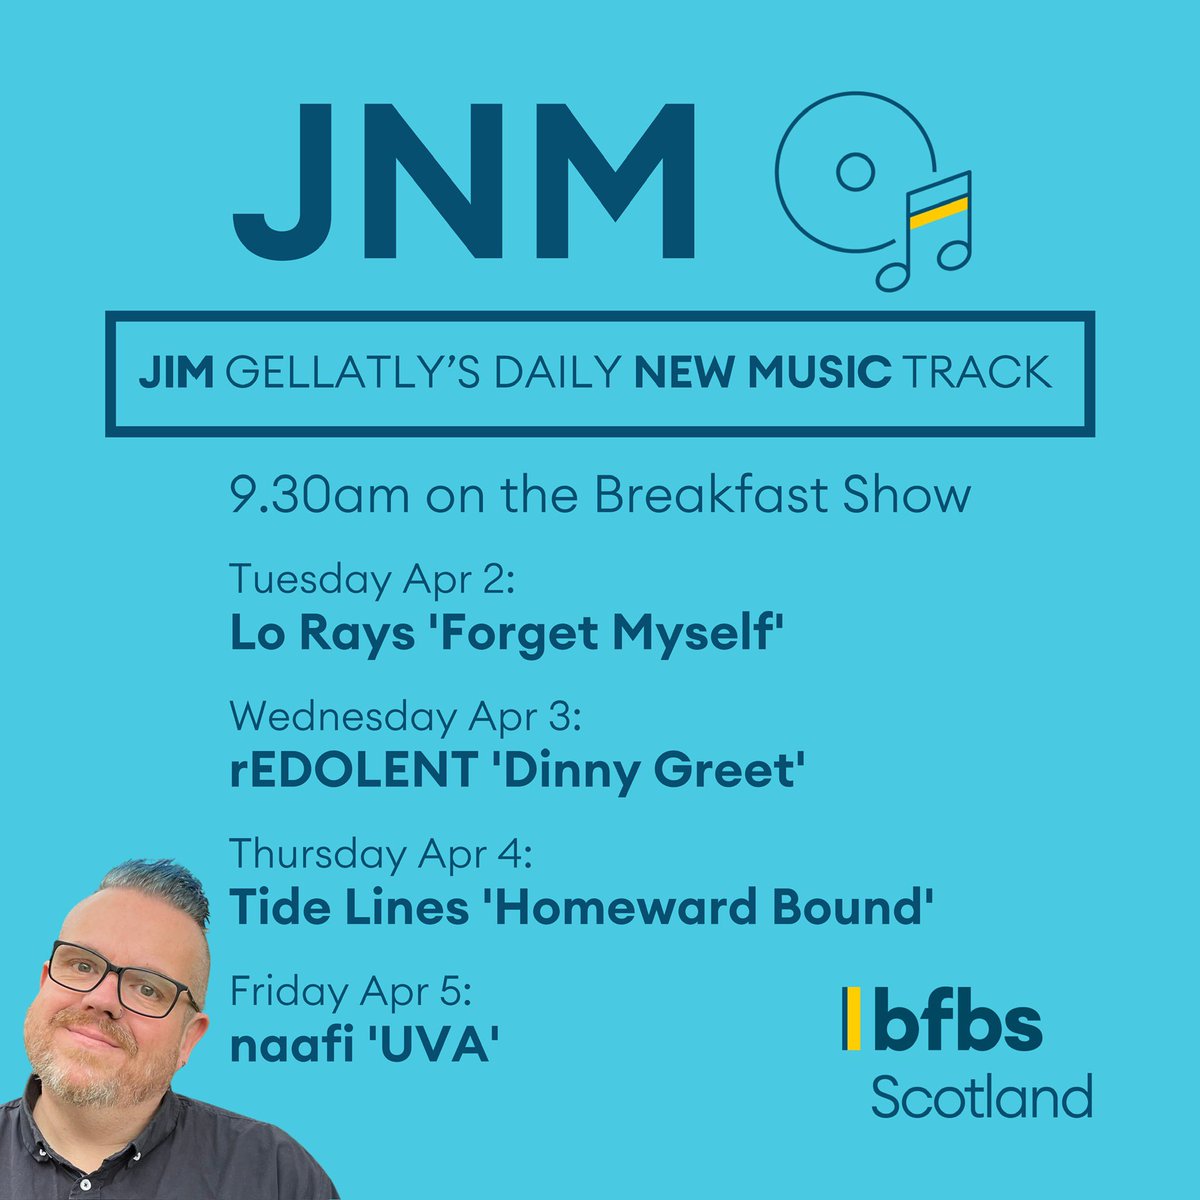 More new music from Scotland with Jim on the Breakfast Show! 🏴󠁧󠁢󠁳󠁣󠁴󠁿 📻 bfbs.com/scotland